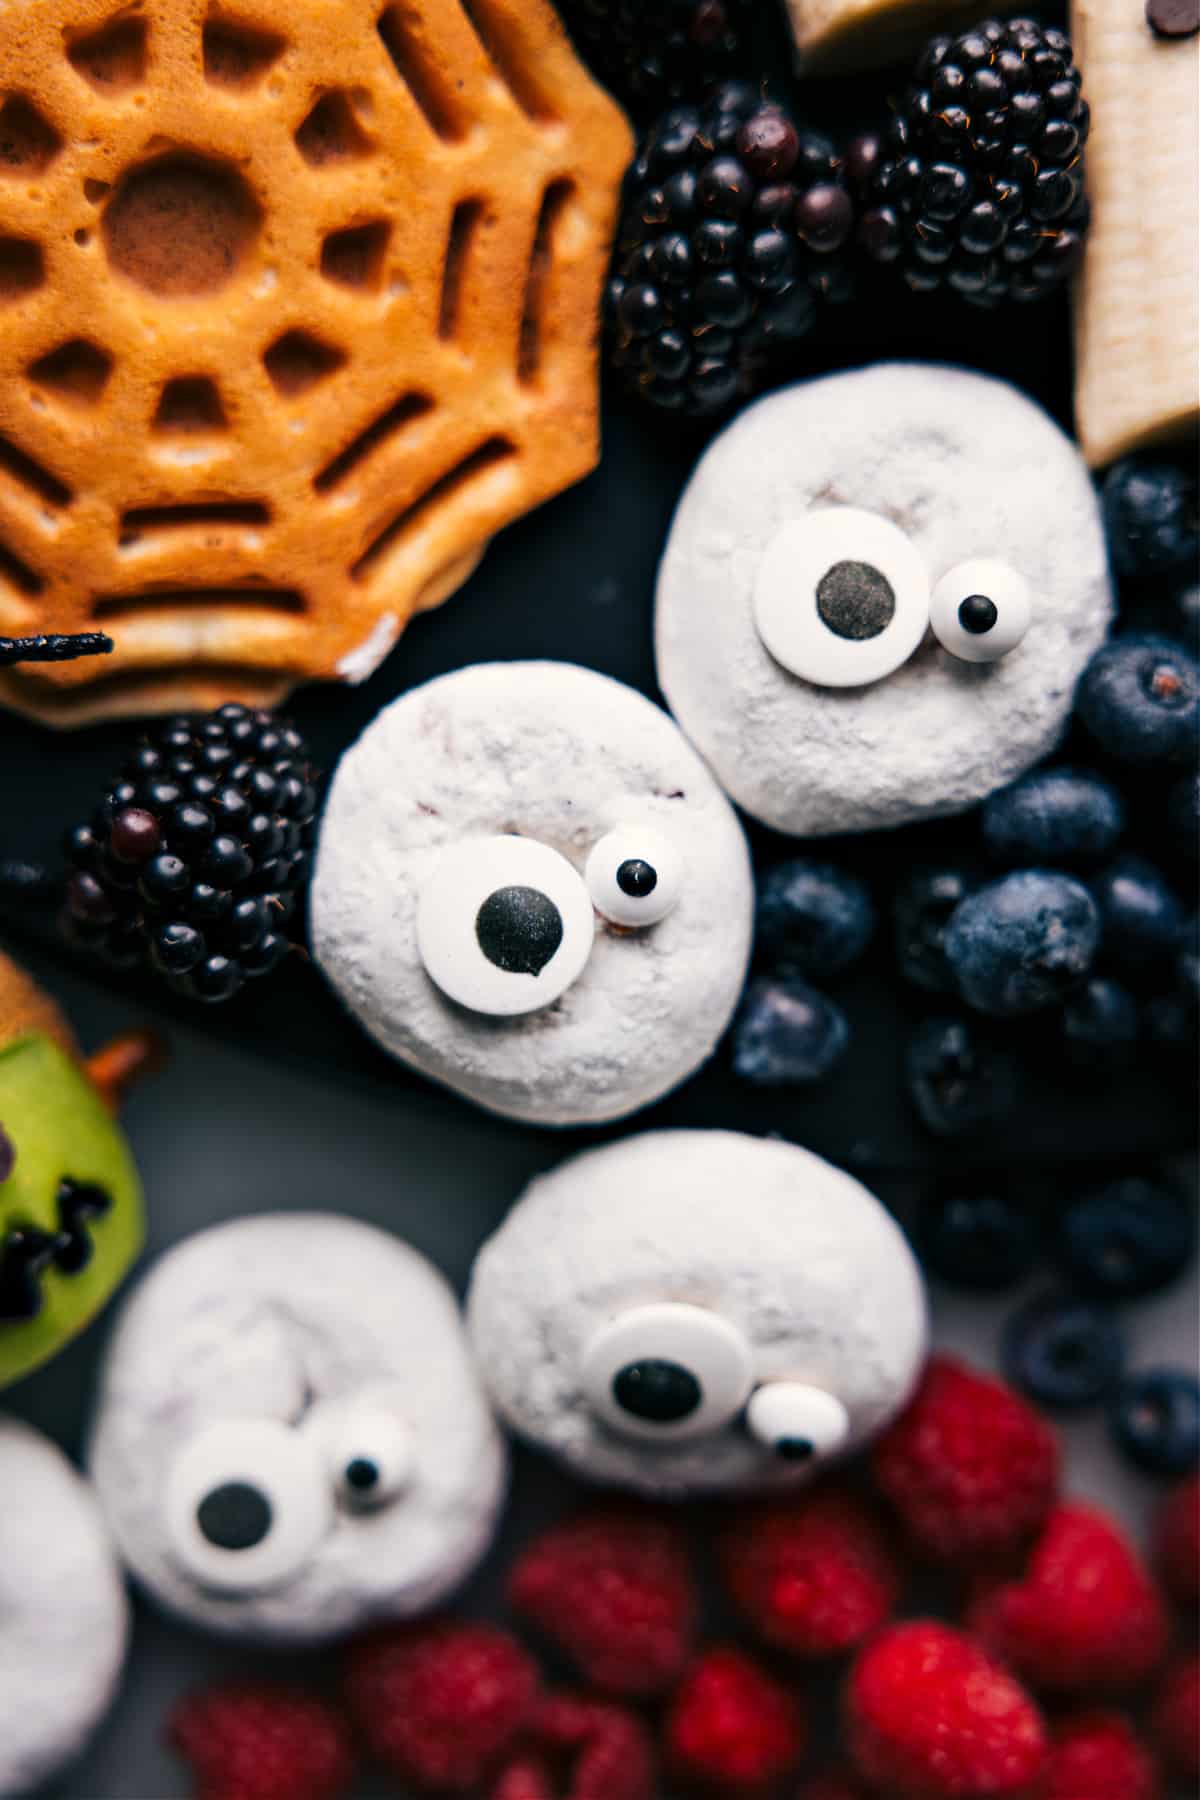 Donuts decorated to resemble ghosts, a Halloween Breakfast Idea.